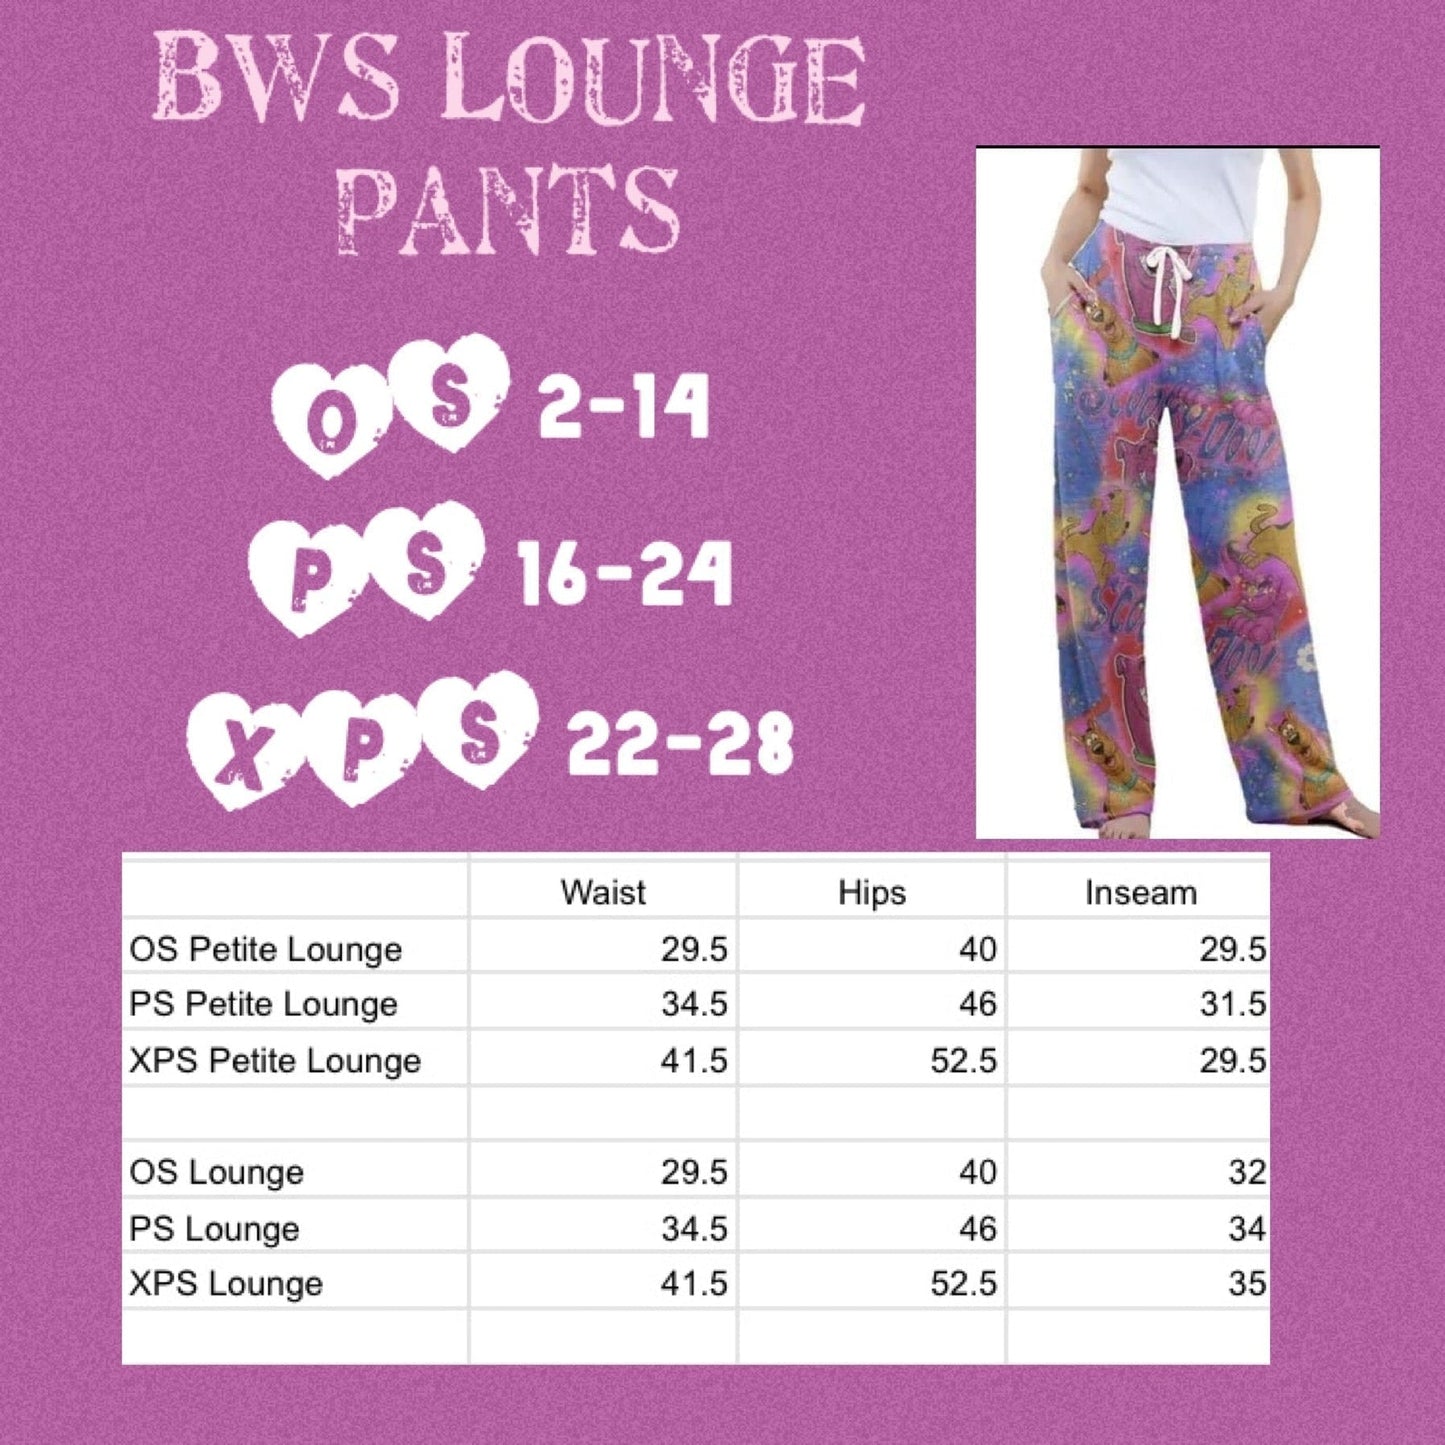 Blue Line Legging, Lounge Pants and Joggers